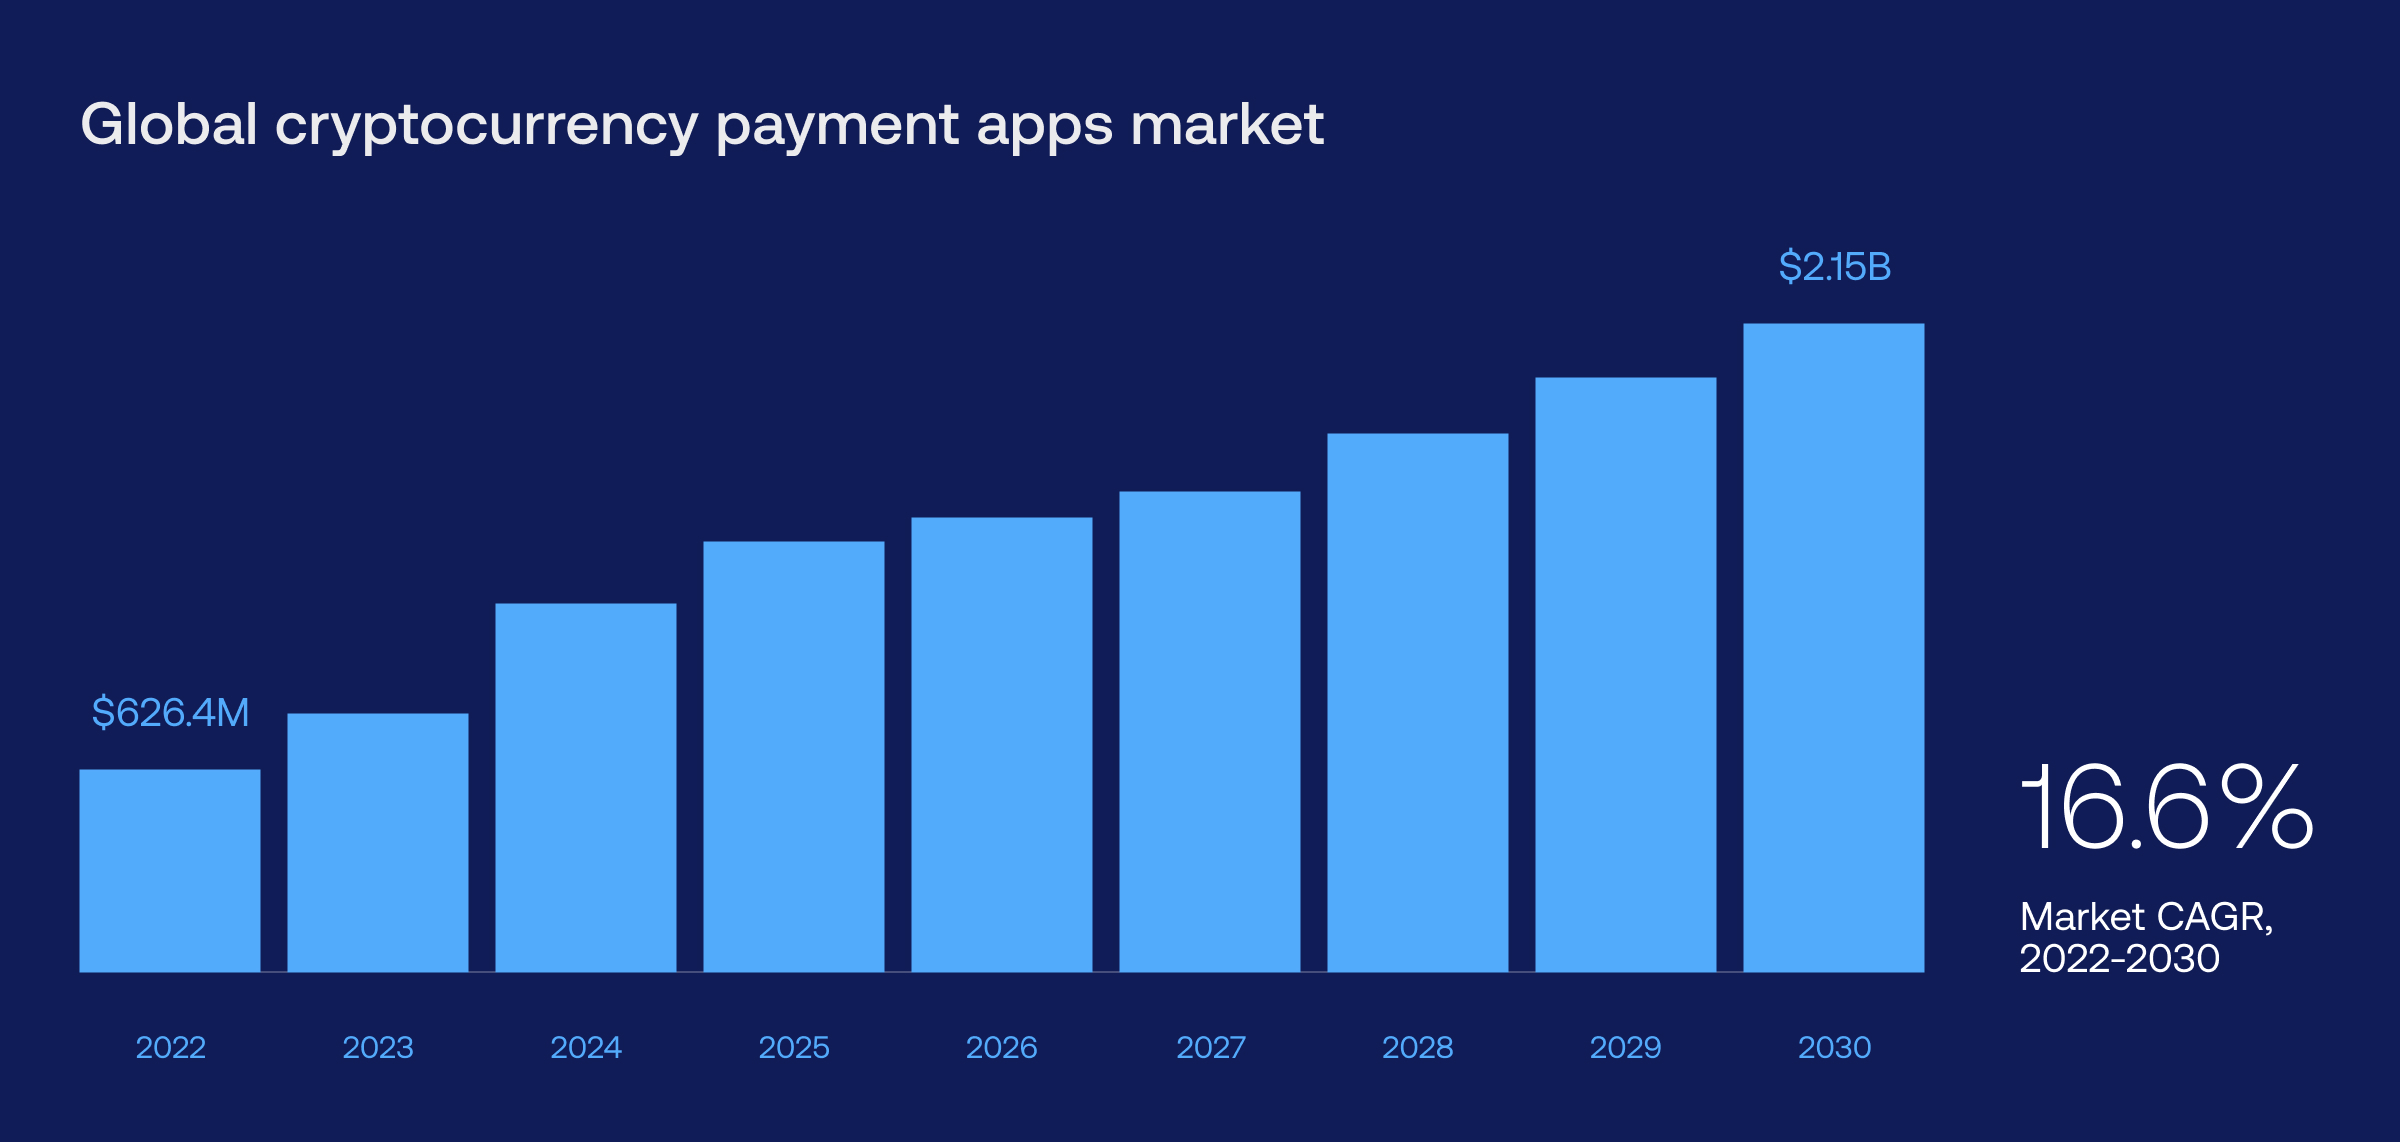 global cryptocurrency payment apps market 2022 - 2030